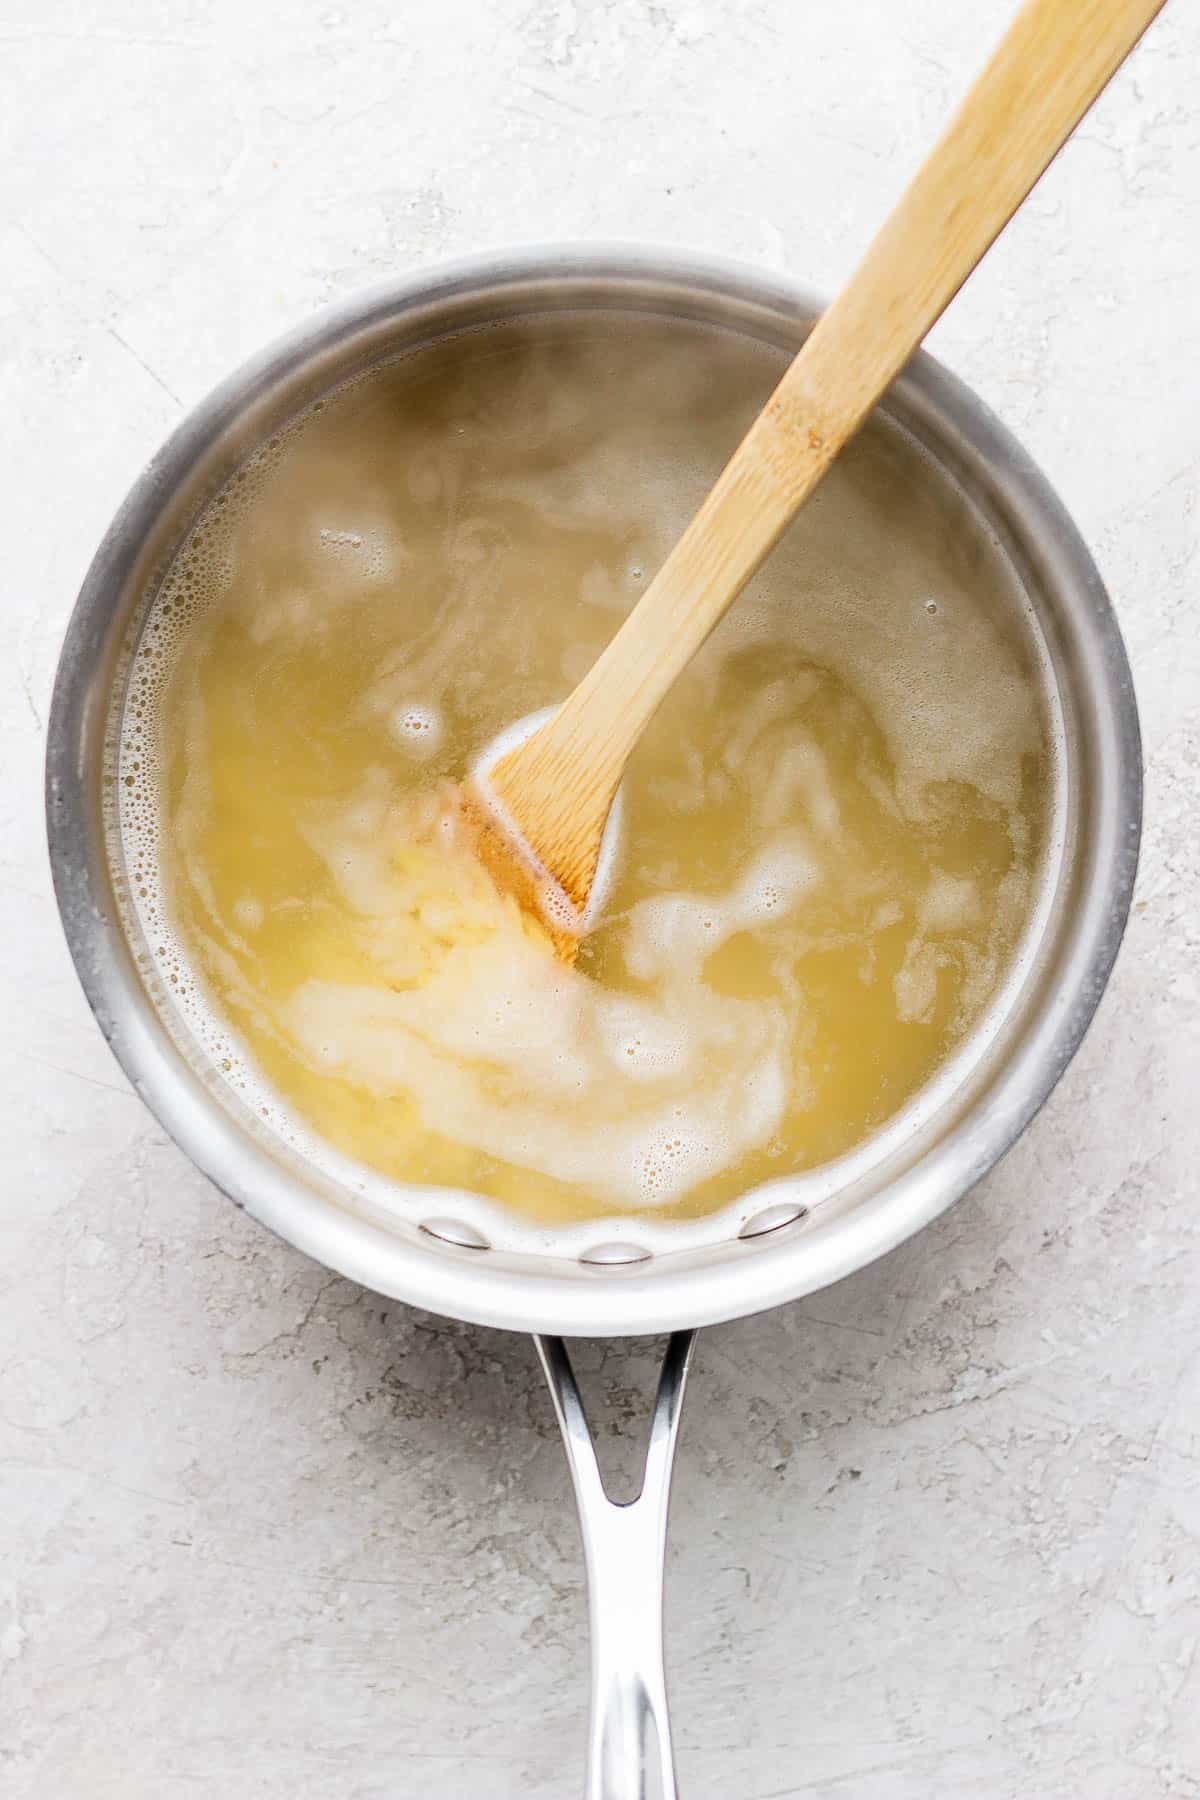 A medium sauce pan with boiling water, orzo, and a wooden spoon.